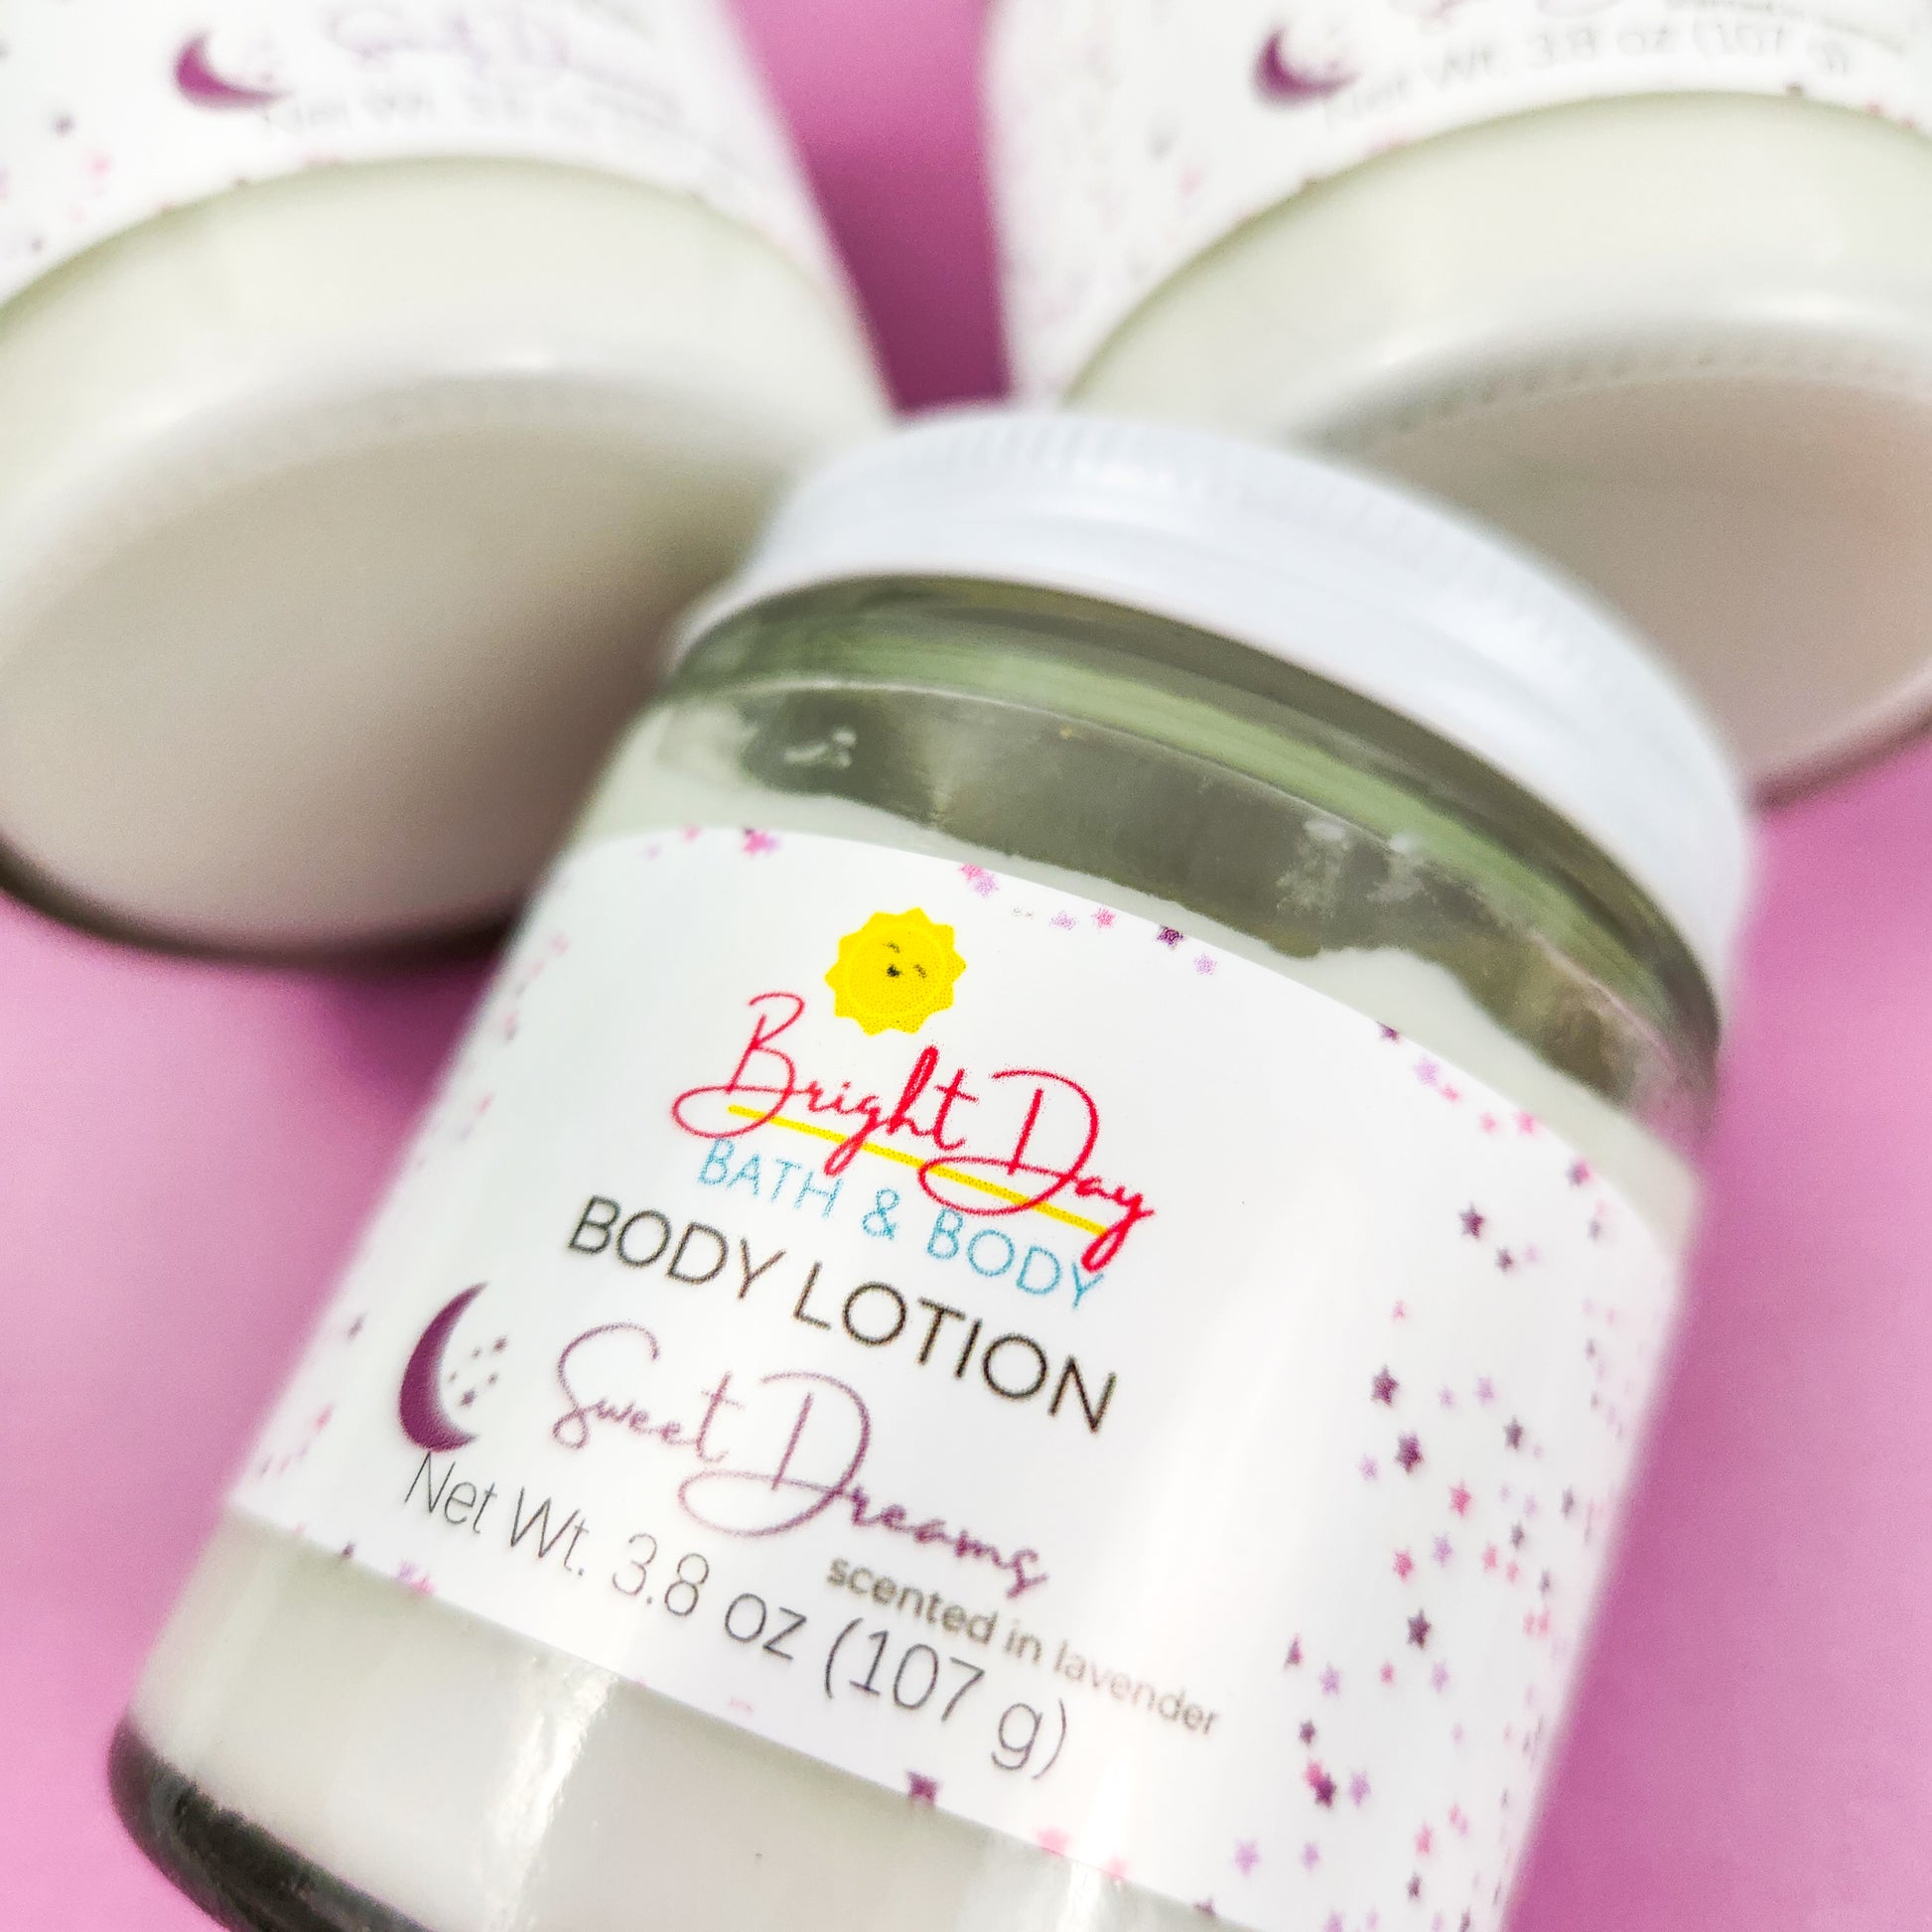 A closeup of the front label of a jar of Sweet Dreams Body Lotion, on a purple background.